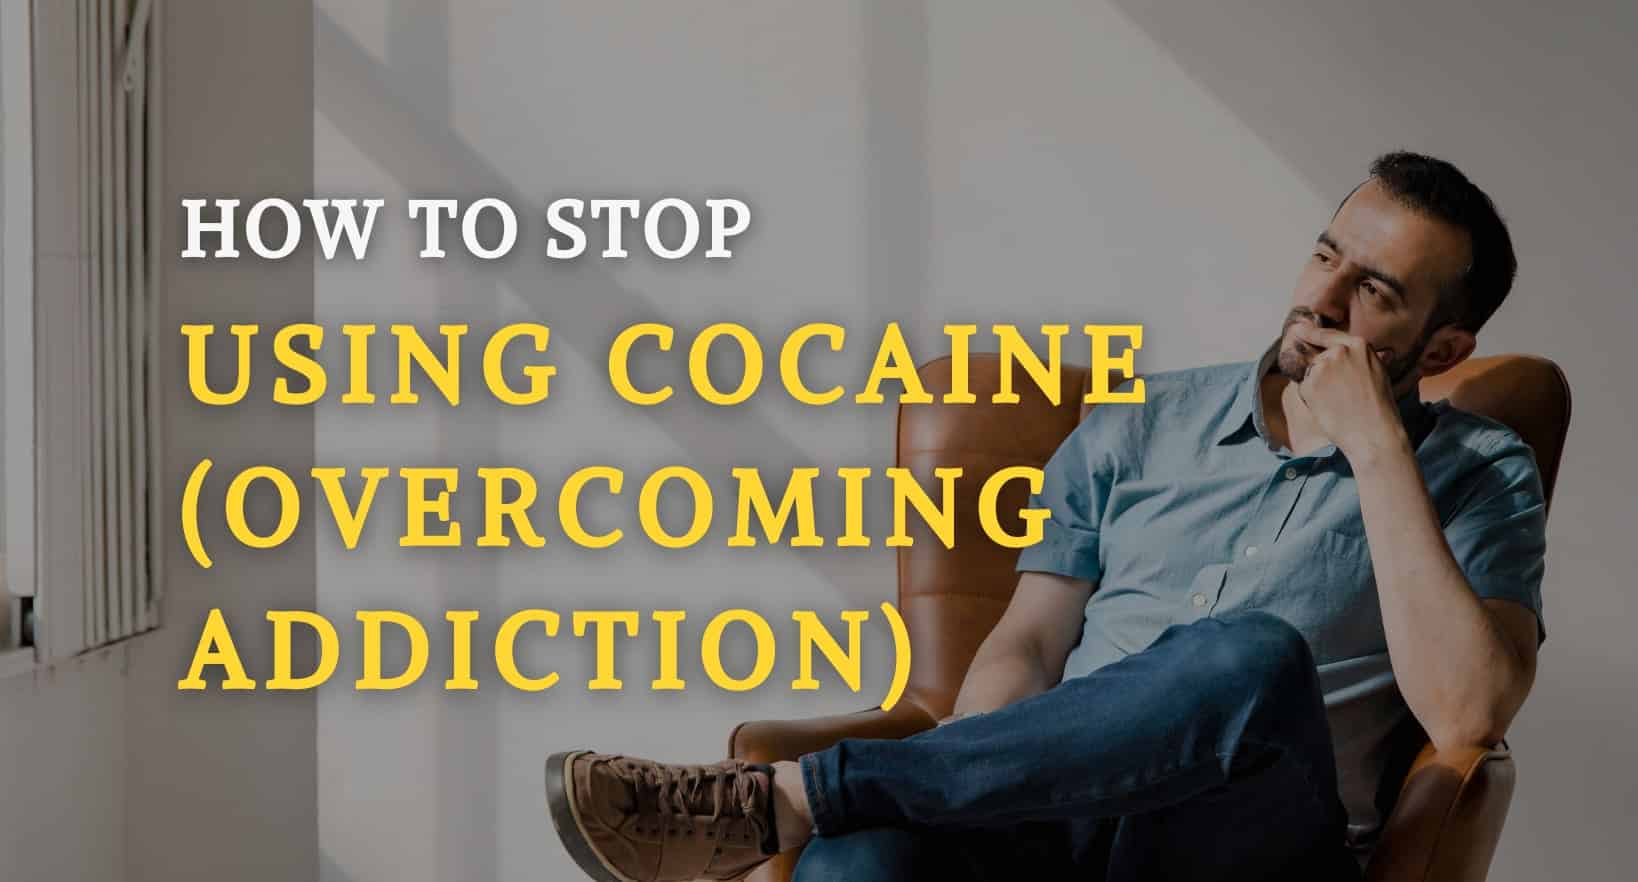 A person is thinking about how to quit cocaine.